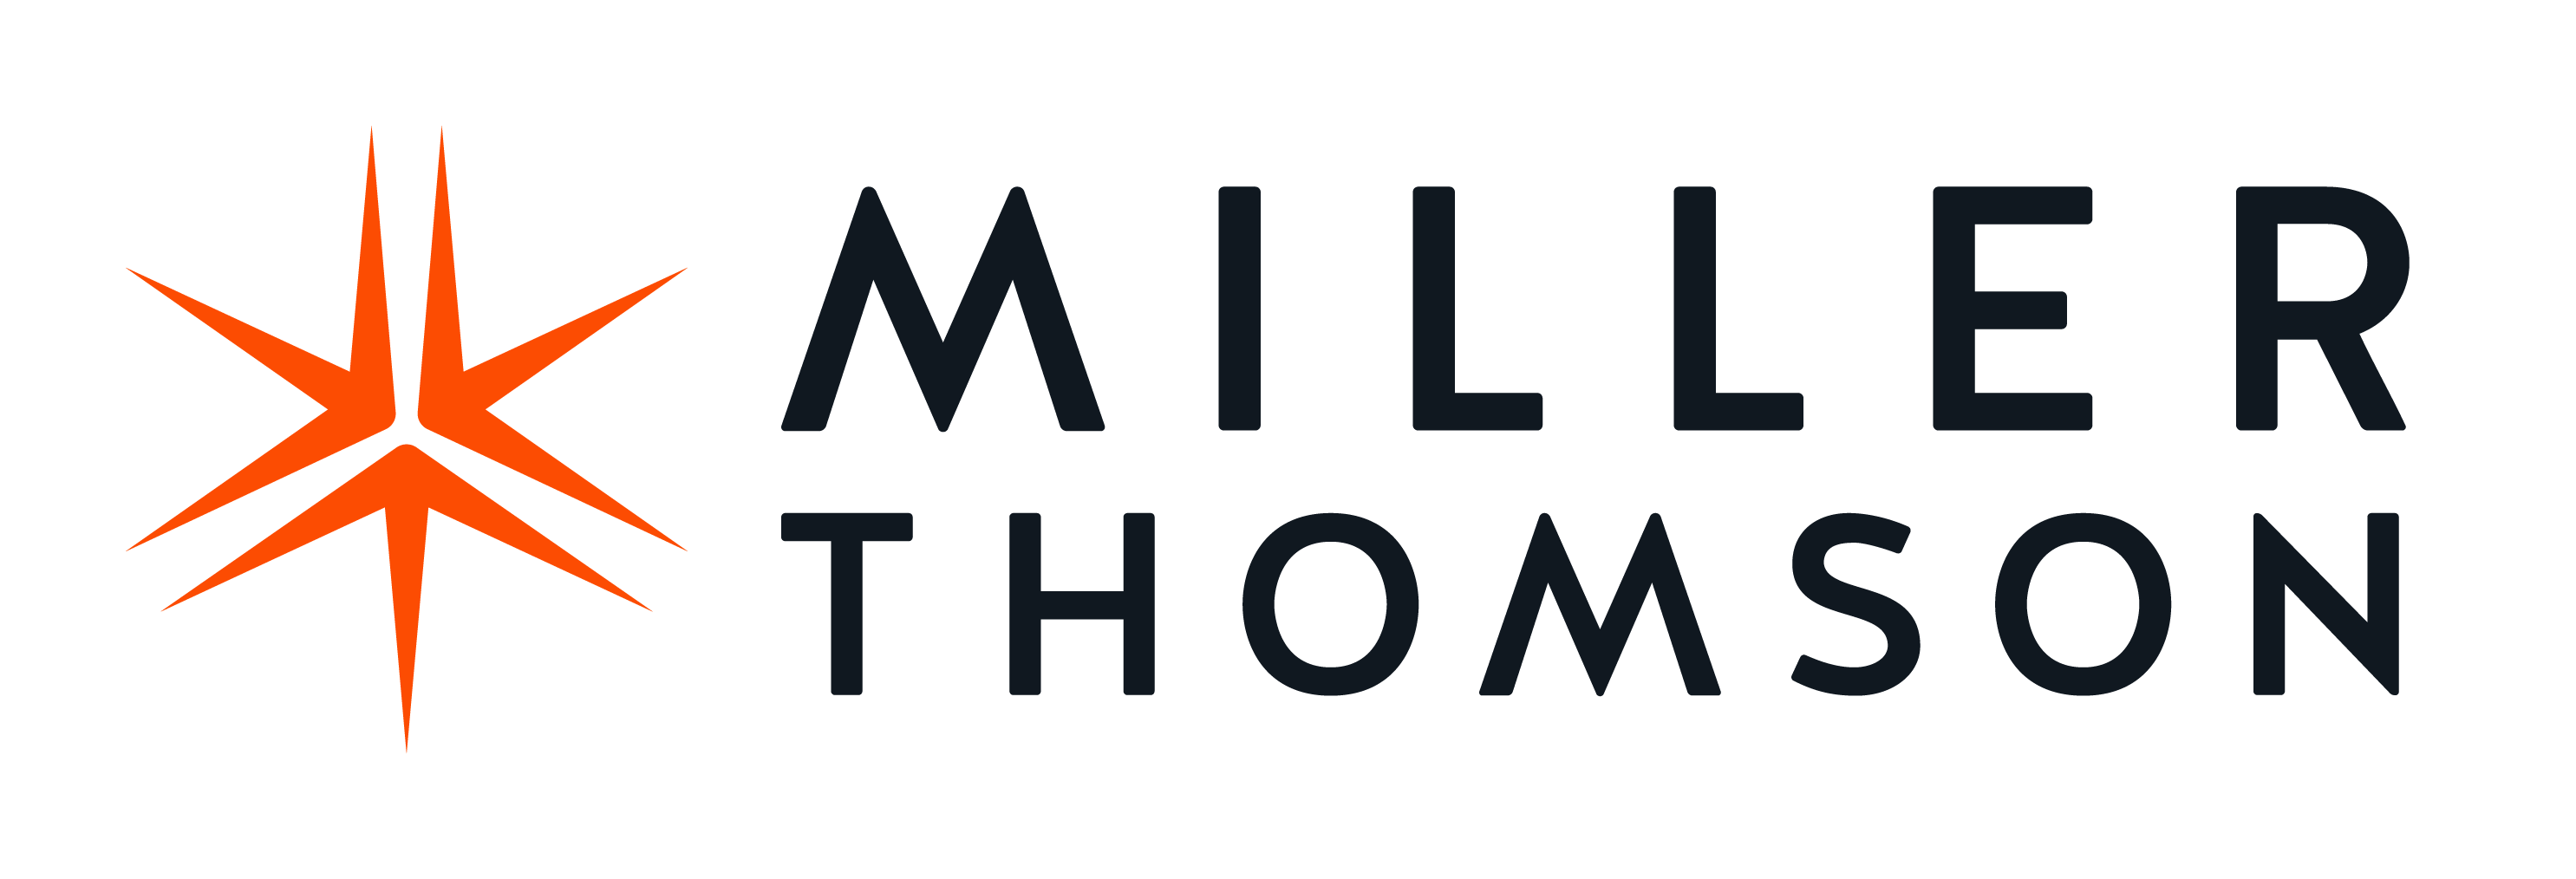 miller-thomson-logo-stacked-rgb-colour-k.png